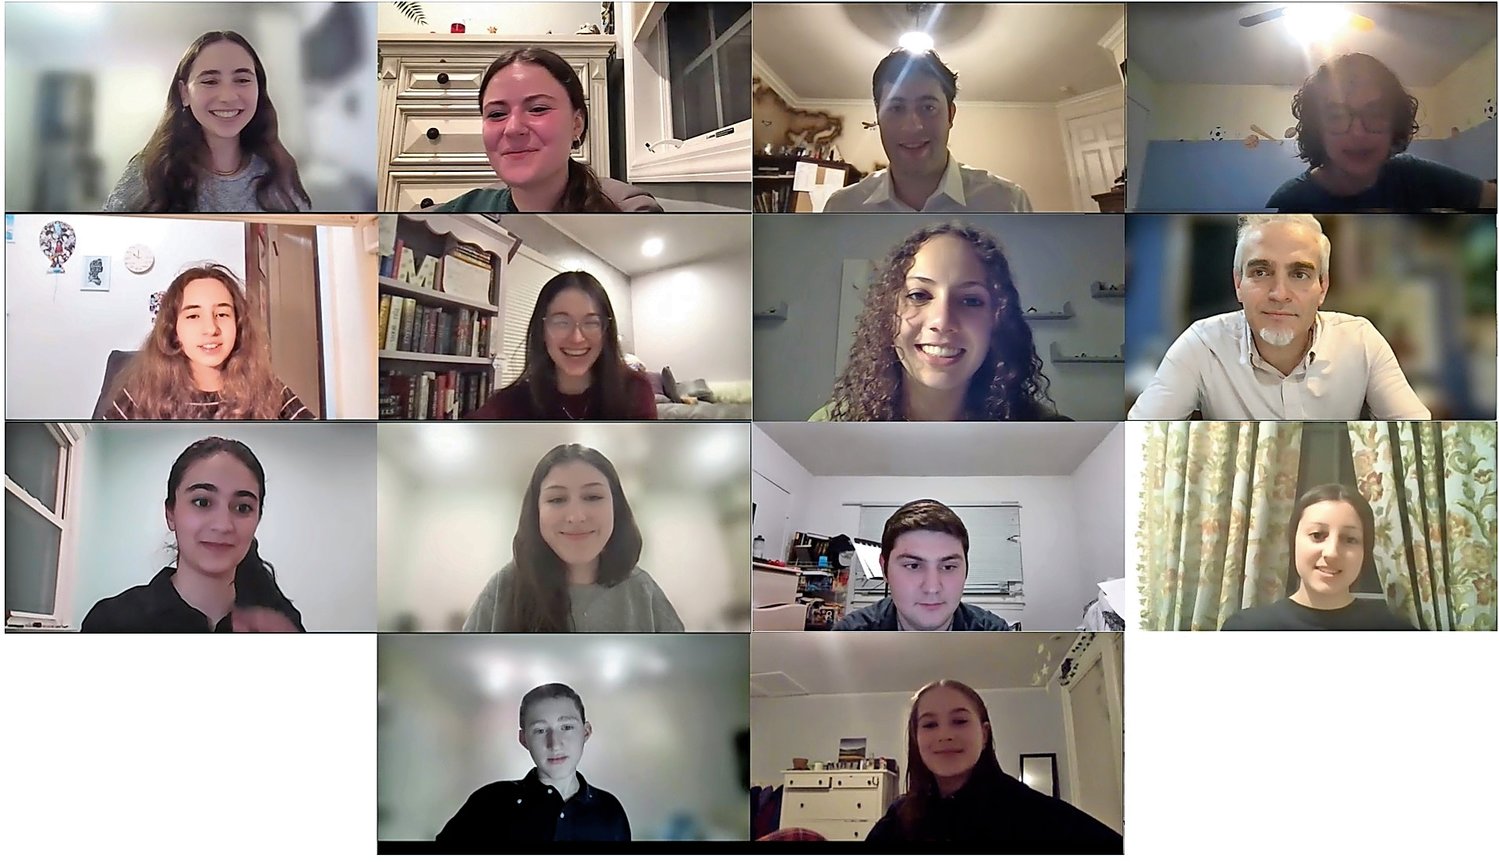 A virtual meeting of the South Shore Online District. From left at top were Kaitlin Pollack and Dasi Weill, of HAFTR; Benjamin Cohen, of Katz Yeshiva; and Sam Passner, of the Idea School. From left in the next row were Ilana Greenberg, of North Shore; Maytal Chelst, of Central; Maya Karasanto, of HAFTR; and Alex Libkind, the district coordinator. Below them, from left, were Batya Kimyagarov, of SKA; Lulu Morse and Andrew Bereger, of HAFTR; and Chole Mastour, of North Shore. At bottom, from left, were Leo Elgen, of Ramaz, and Isabel Waitman, of the Salantar Akiba Riverdale Academy.